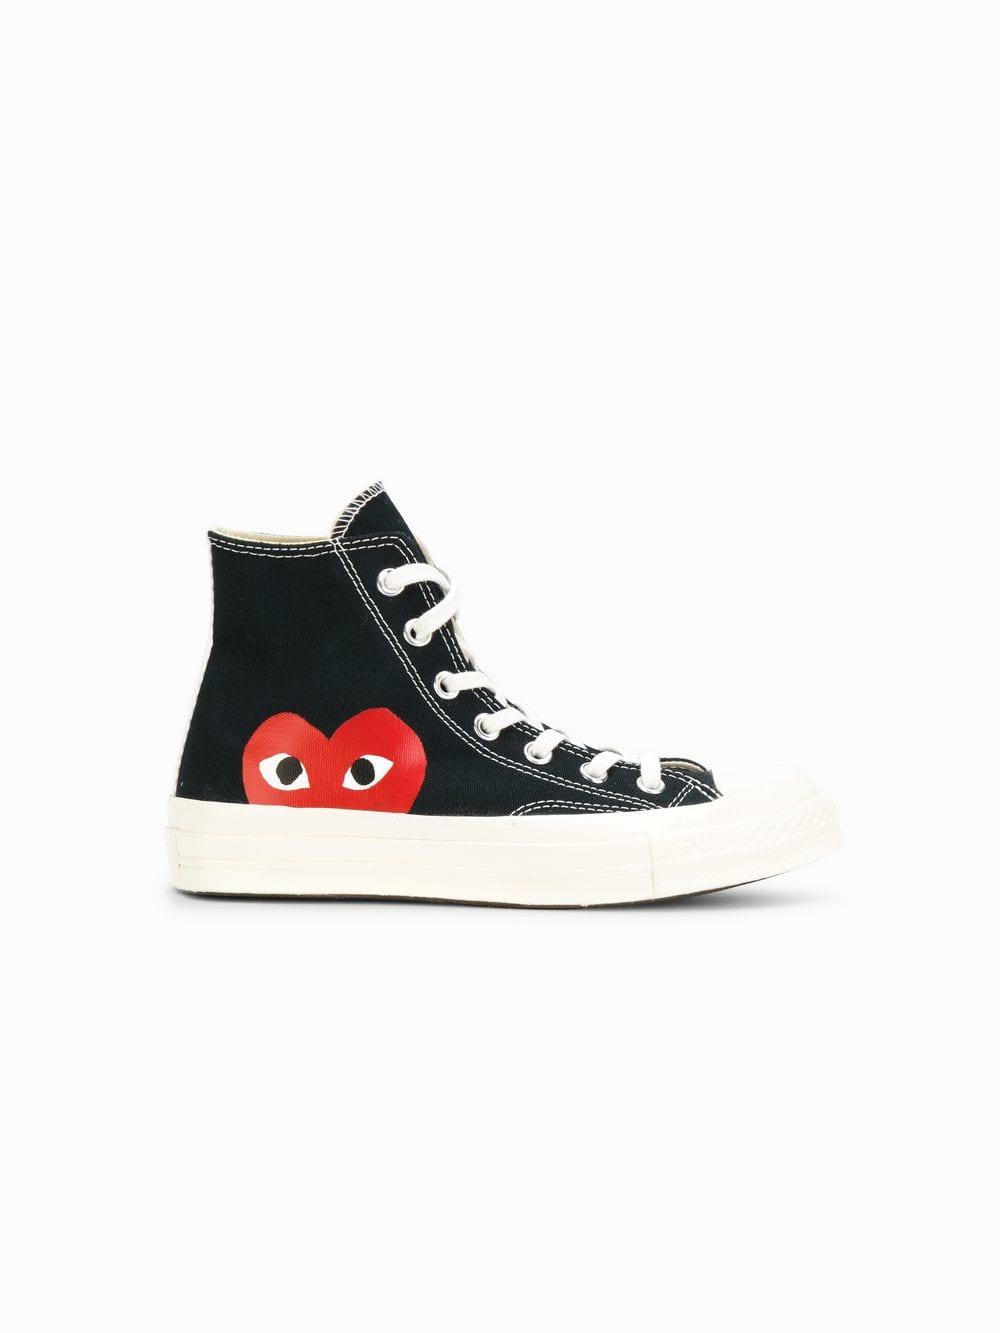 converse black red heart